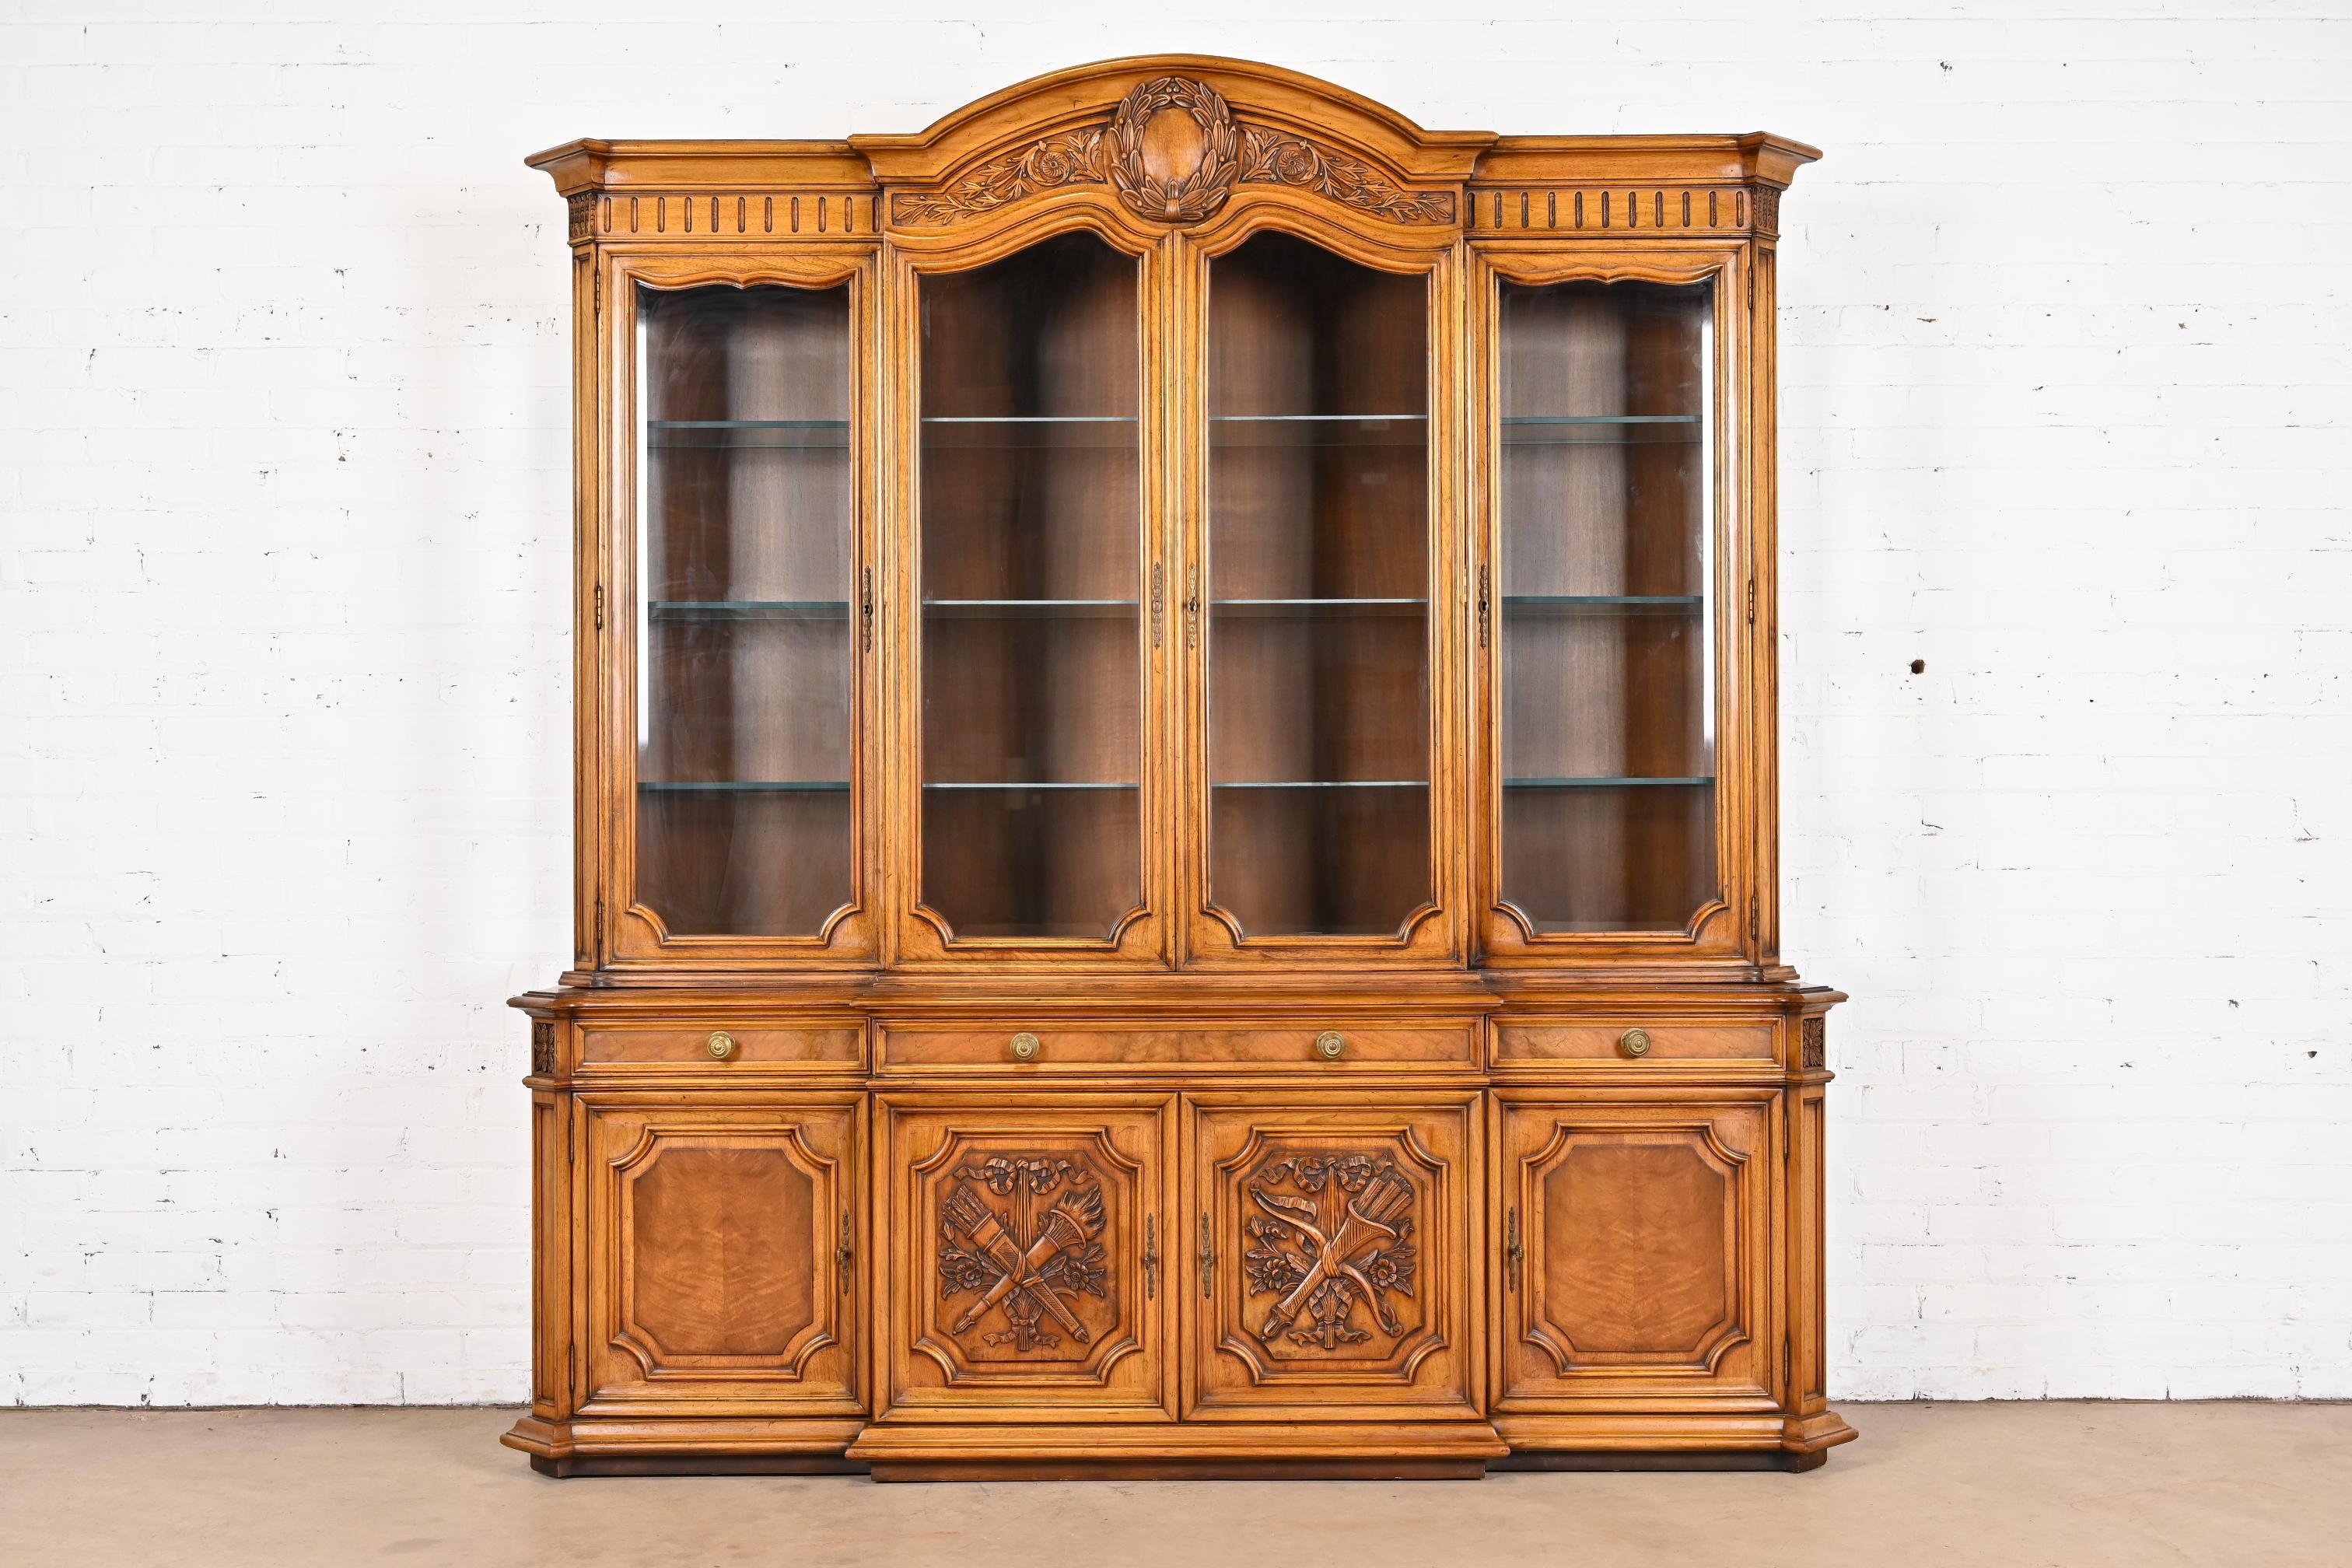 A gorgeous French Regency Louis XVI style lighted breakfront bookcase or dining cabinet

By Karges

USA, Circa 1960s

Carved burled walnut, with glass front doors and original brass hardware. Cabinet locks, and key is included.

Measures: 80.25